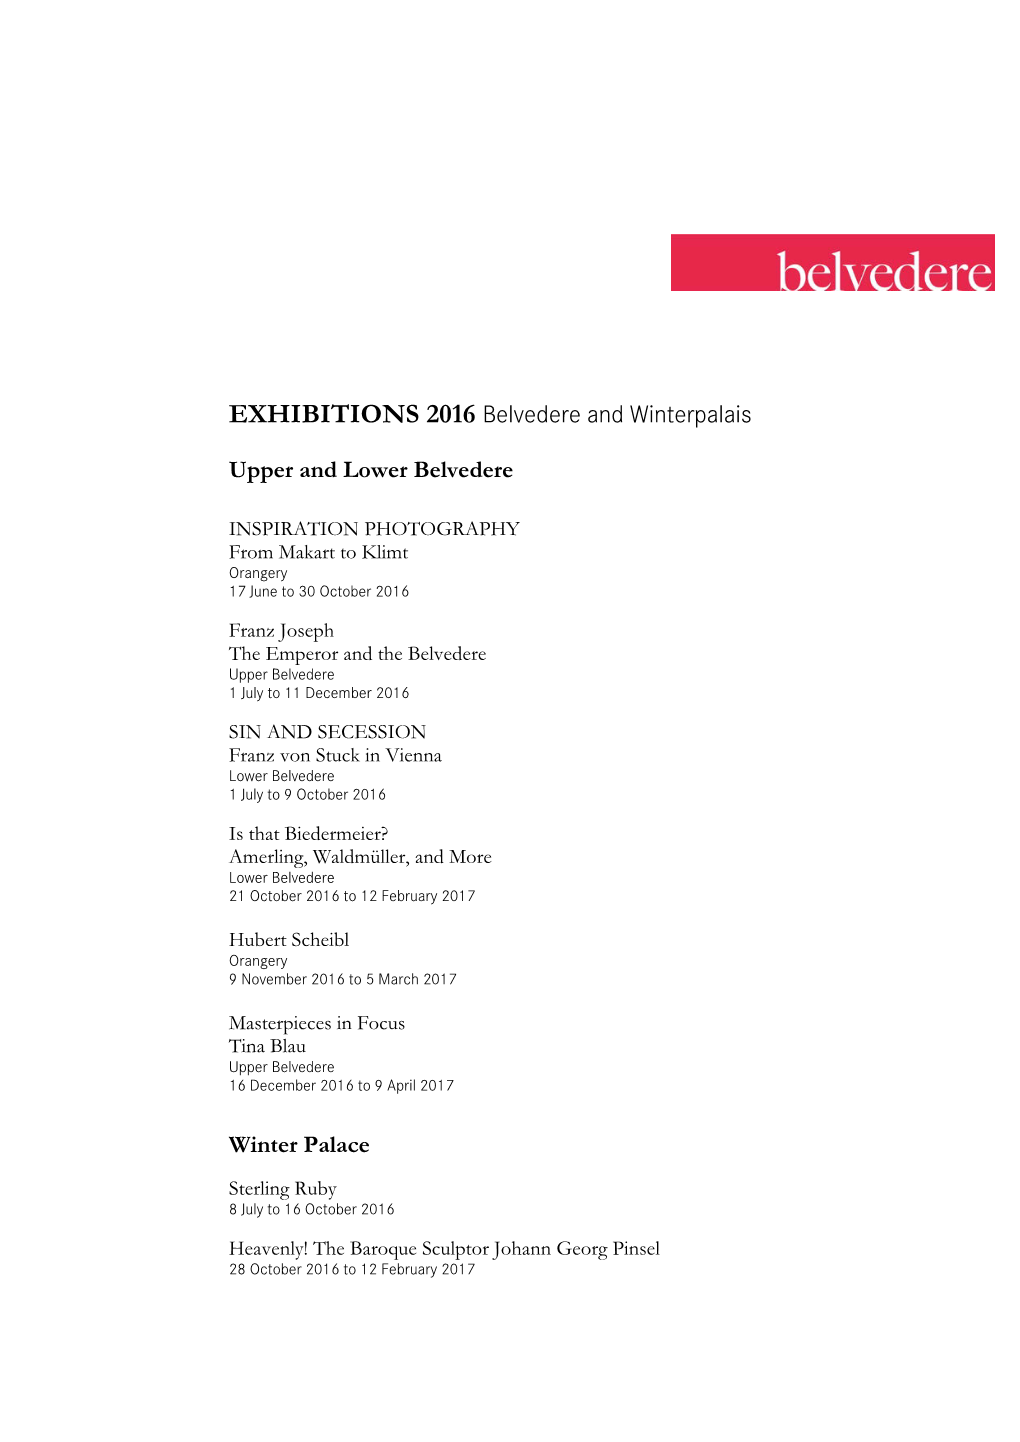 EXHIBITIONS 2016 Belvedere and Winterpalais Upper and Lower